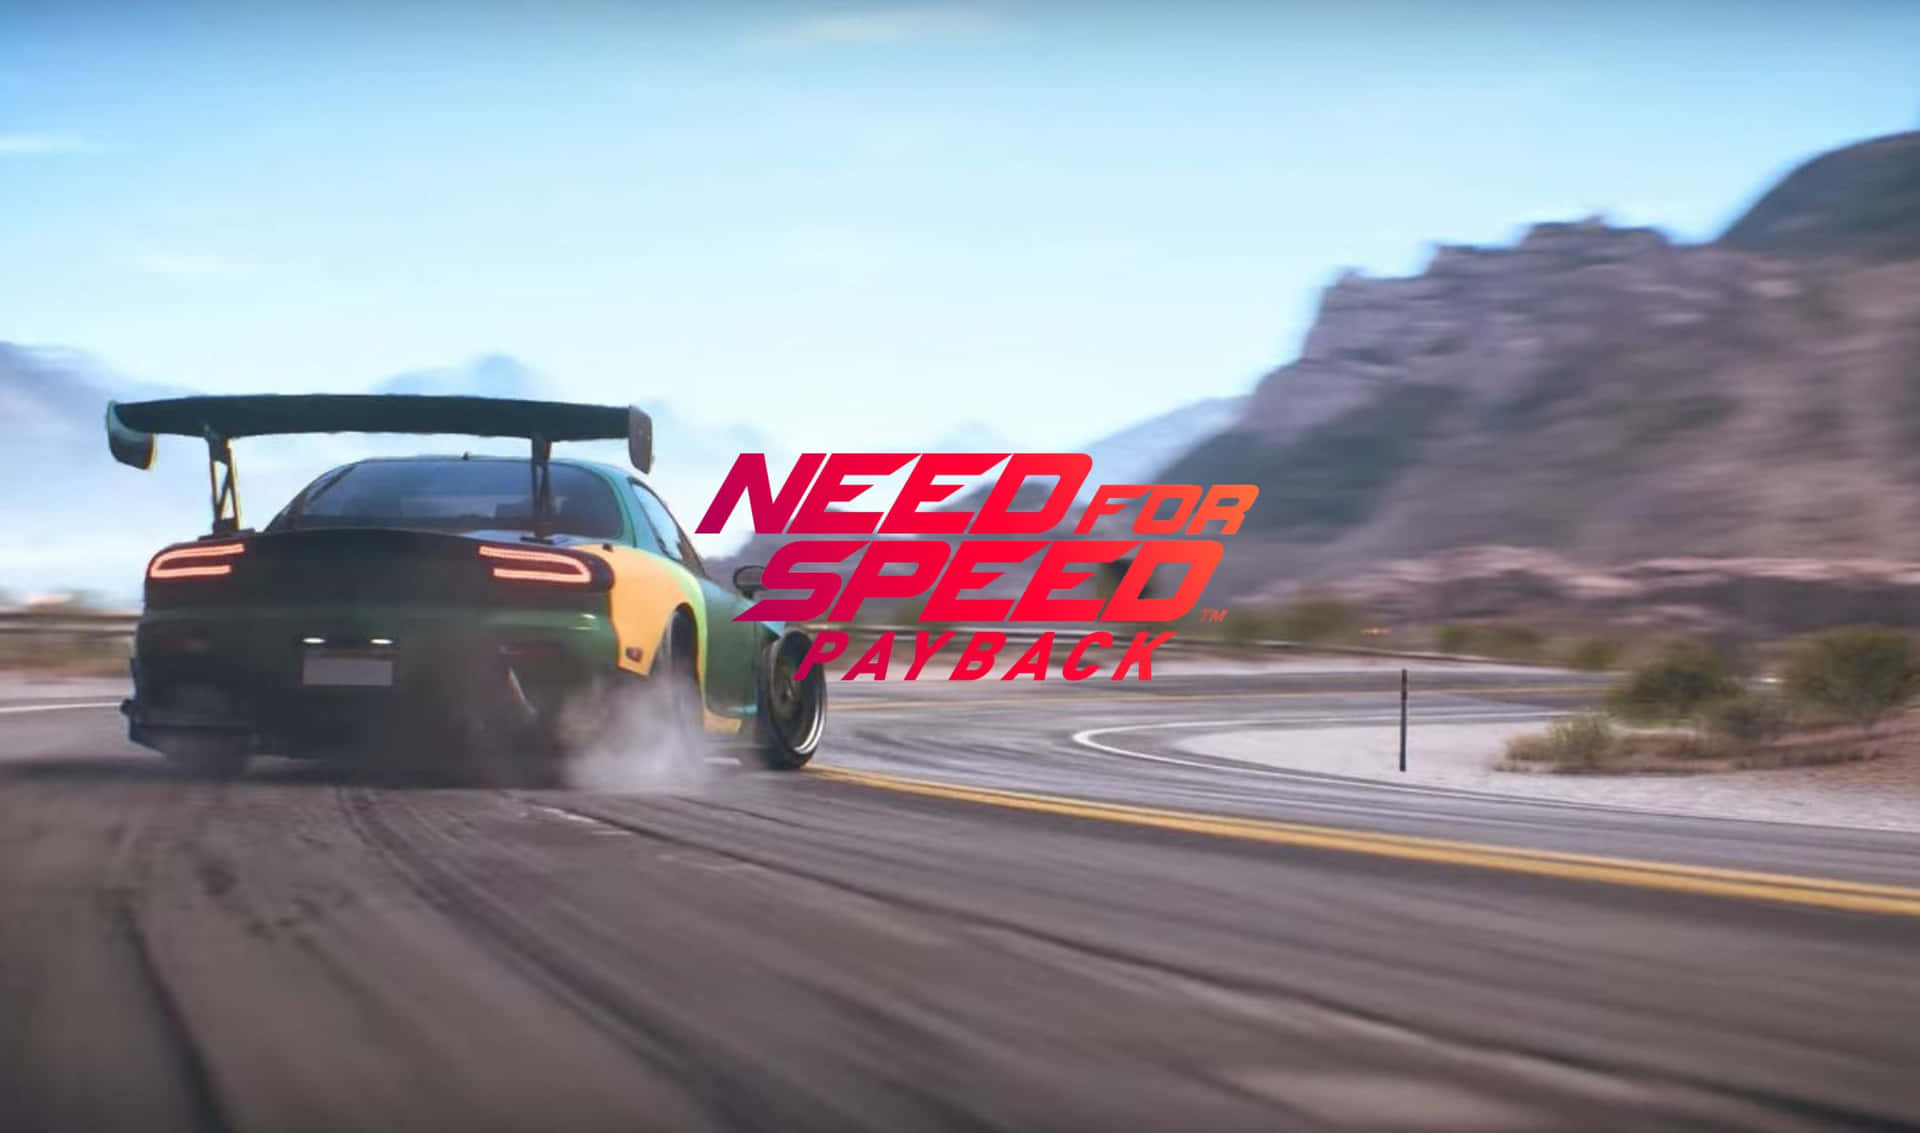 Imagende 2440x1440 Del Videojuego Need For Speed Payback.